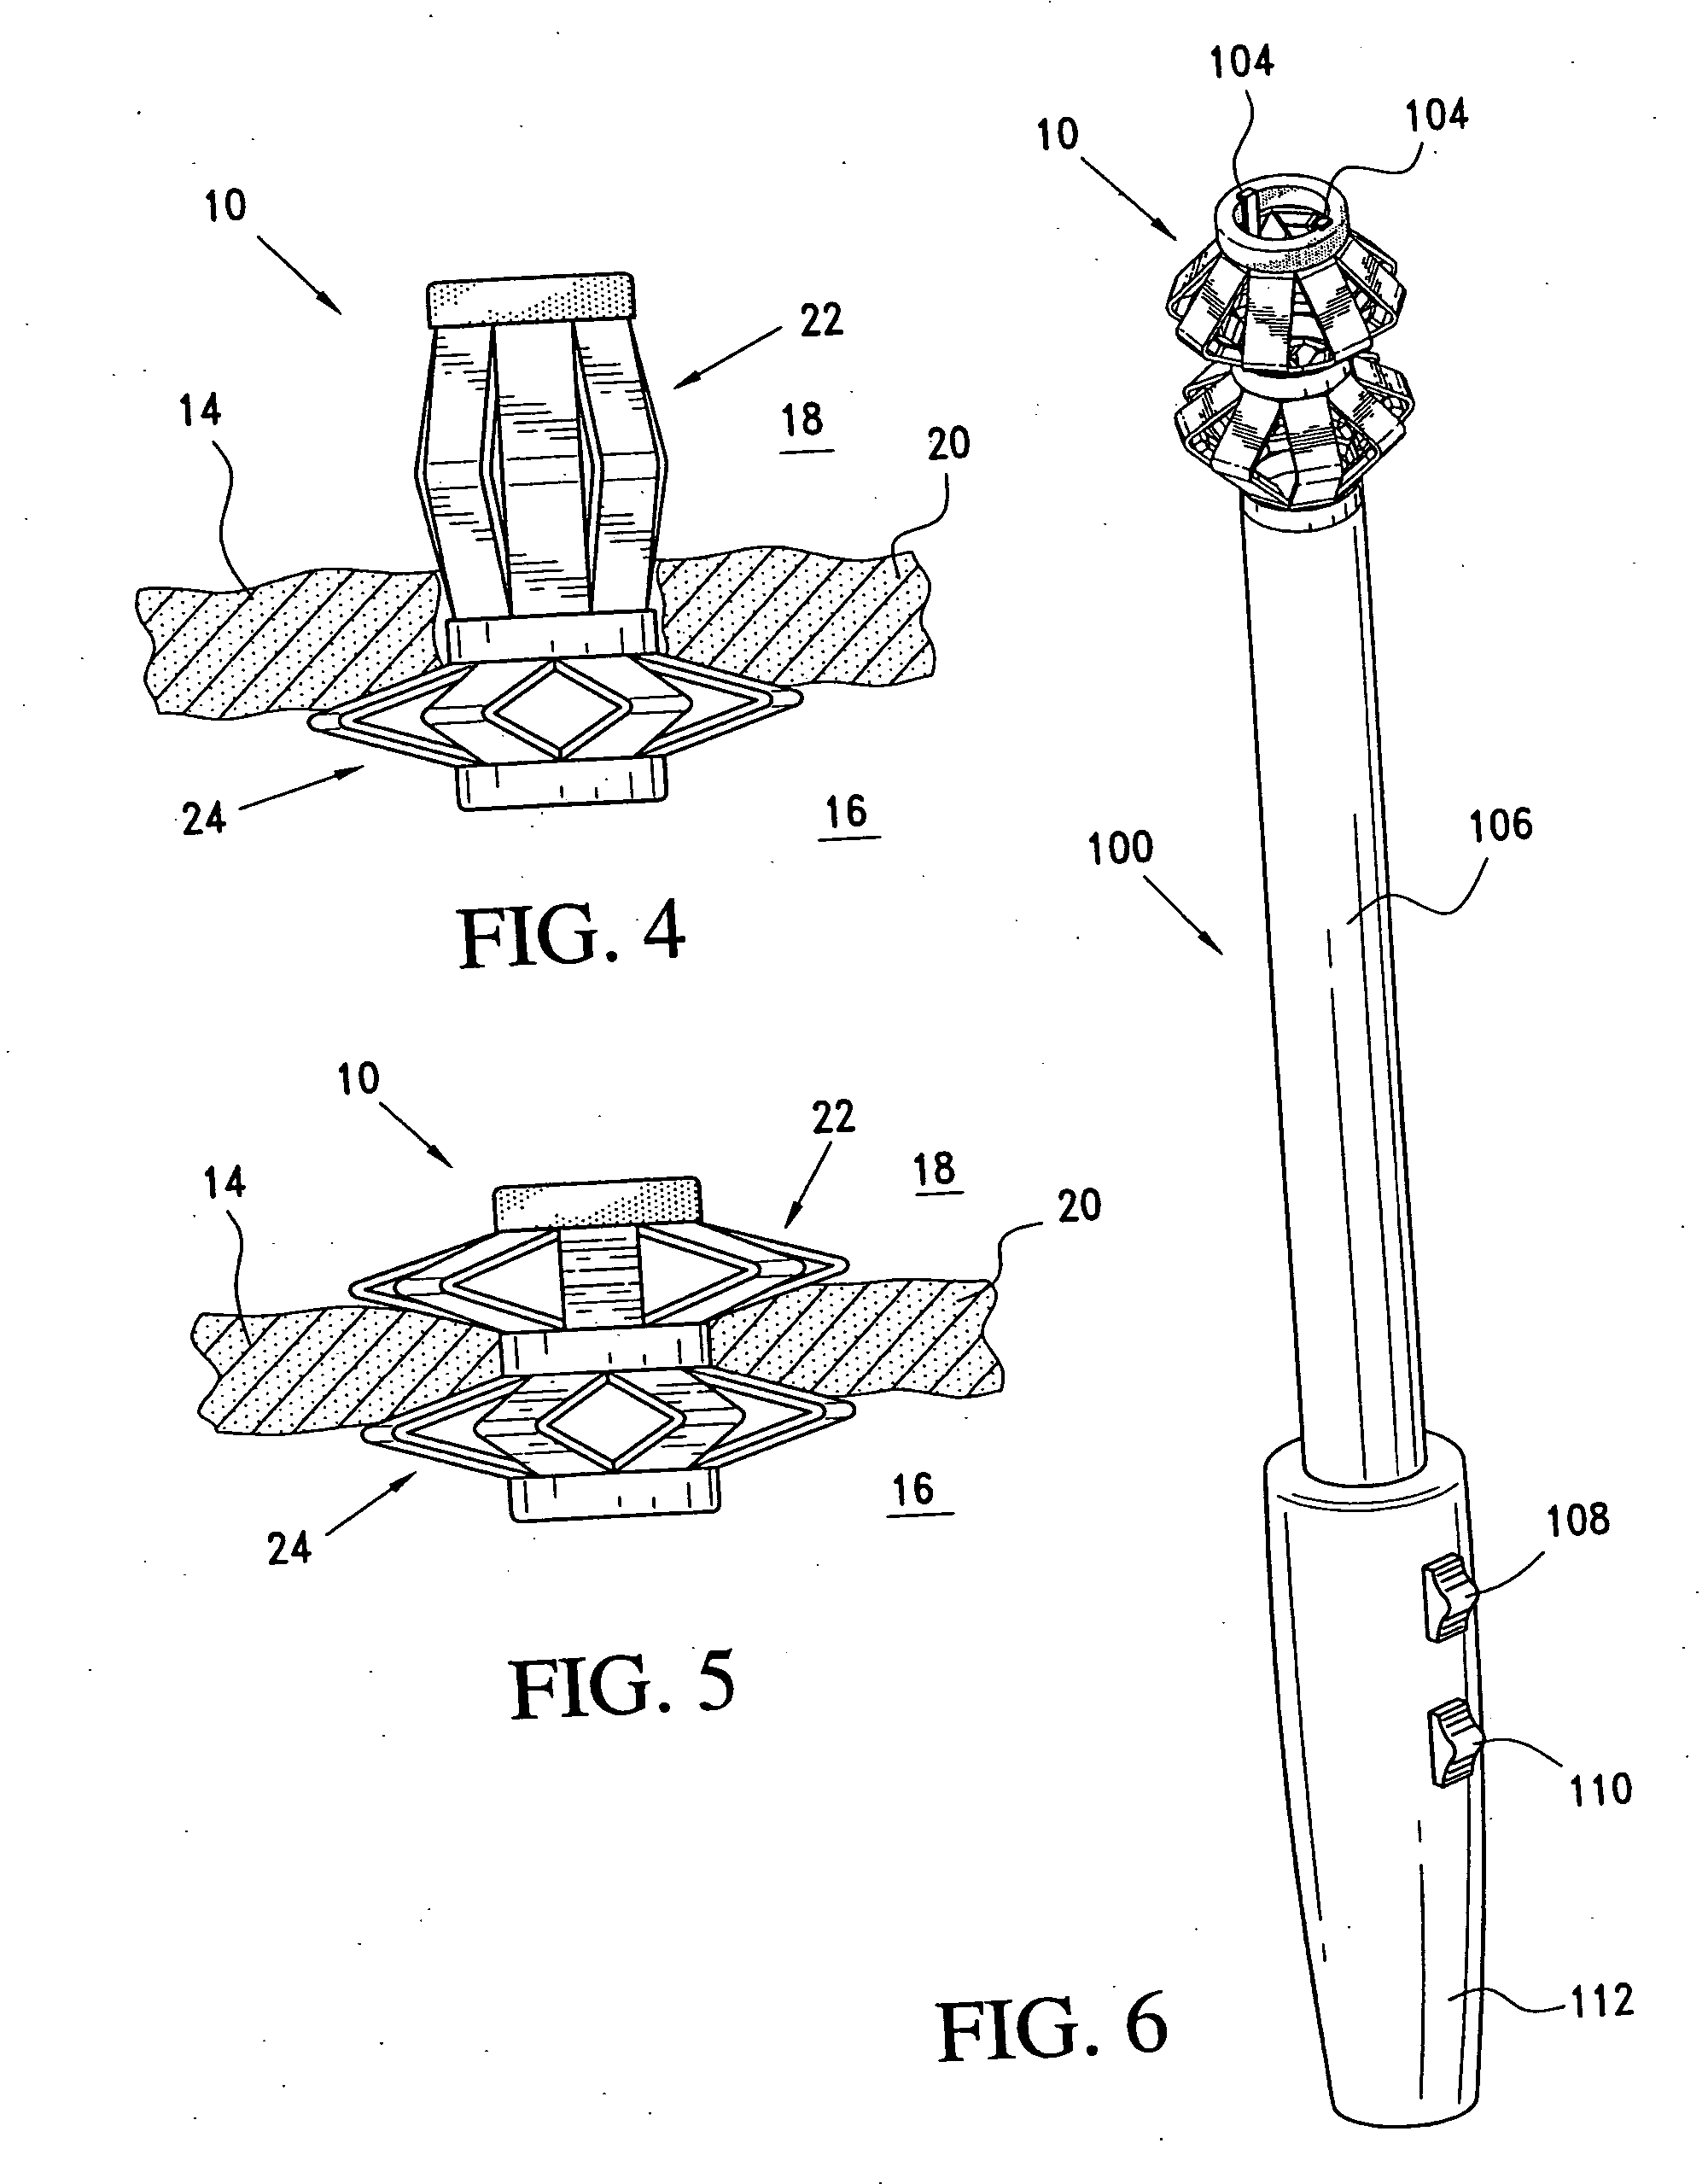 Method and apparatus for sealing a gastric opening